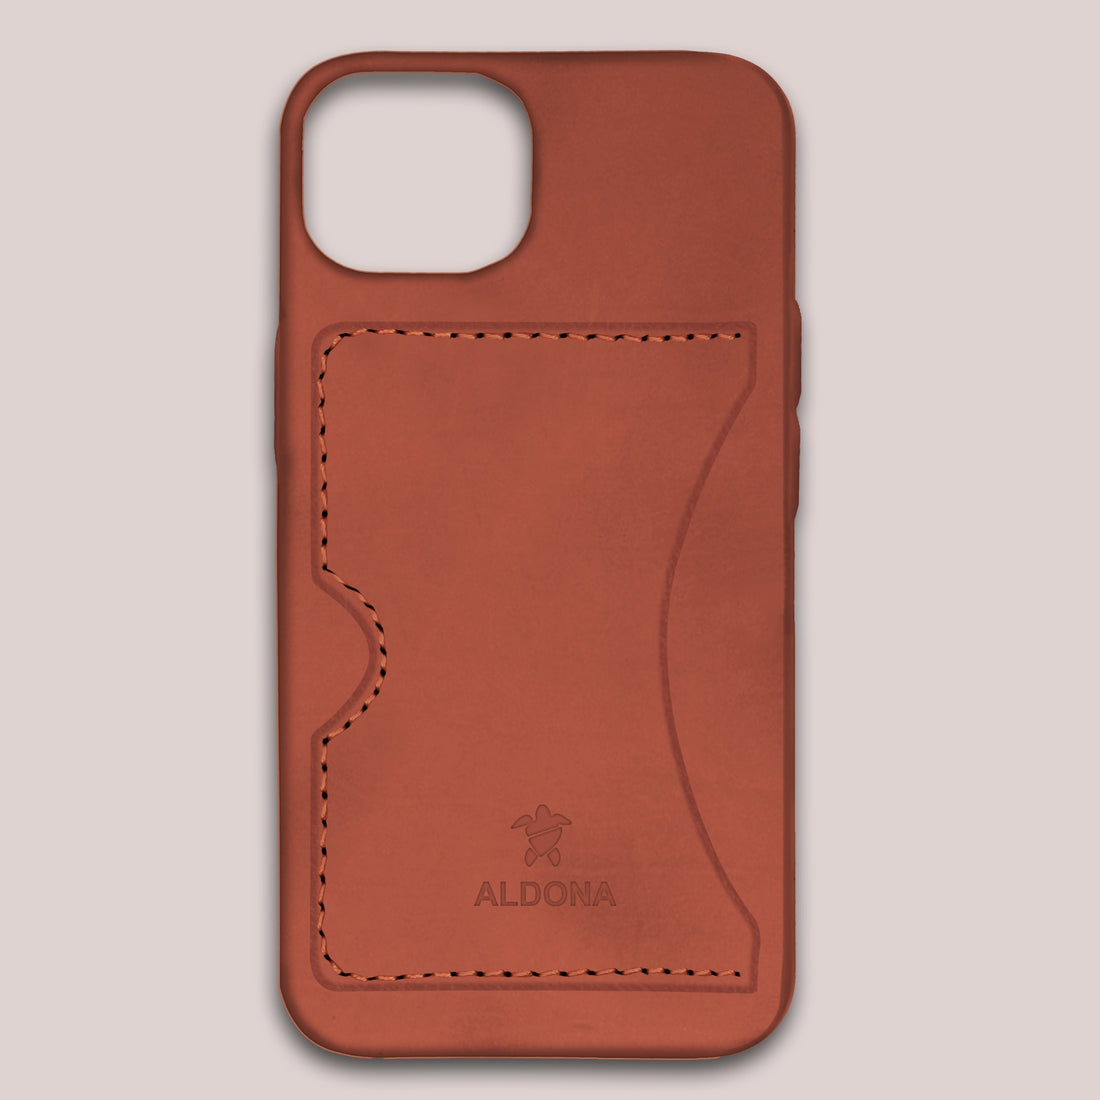 Baxter Card Case for iPhone 14 series - Burnt Tobacco